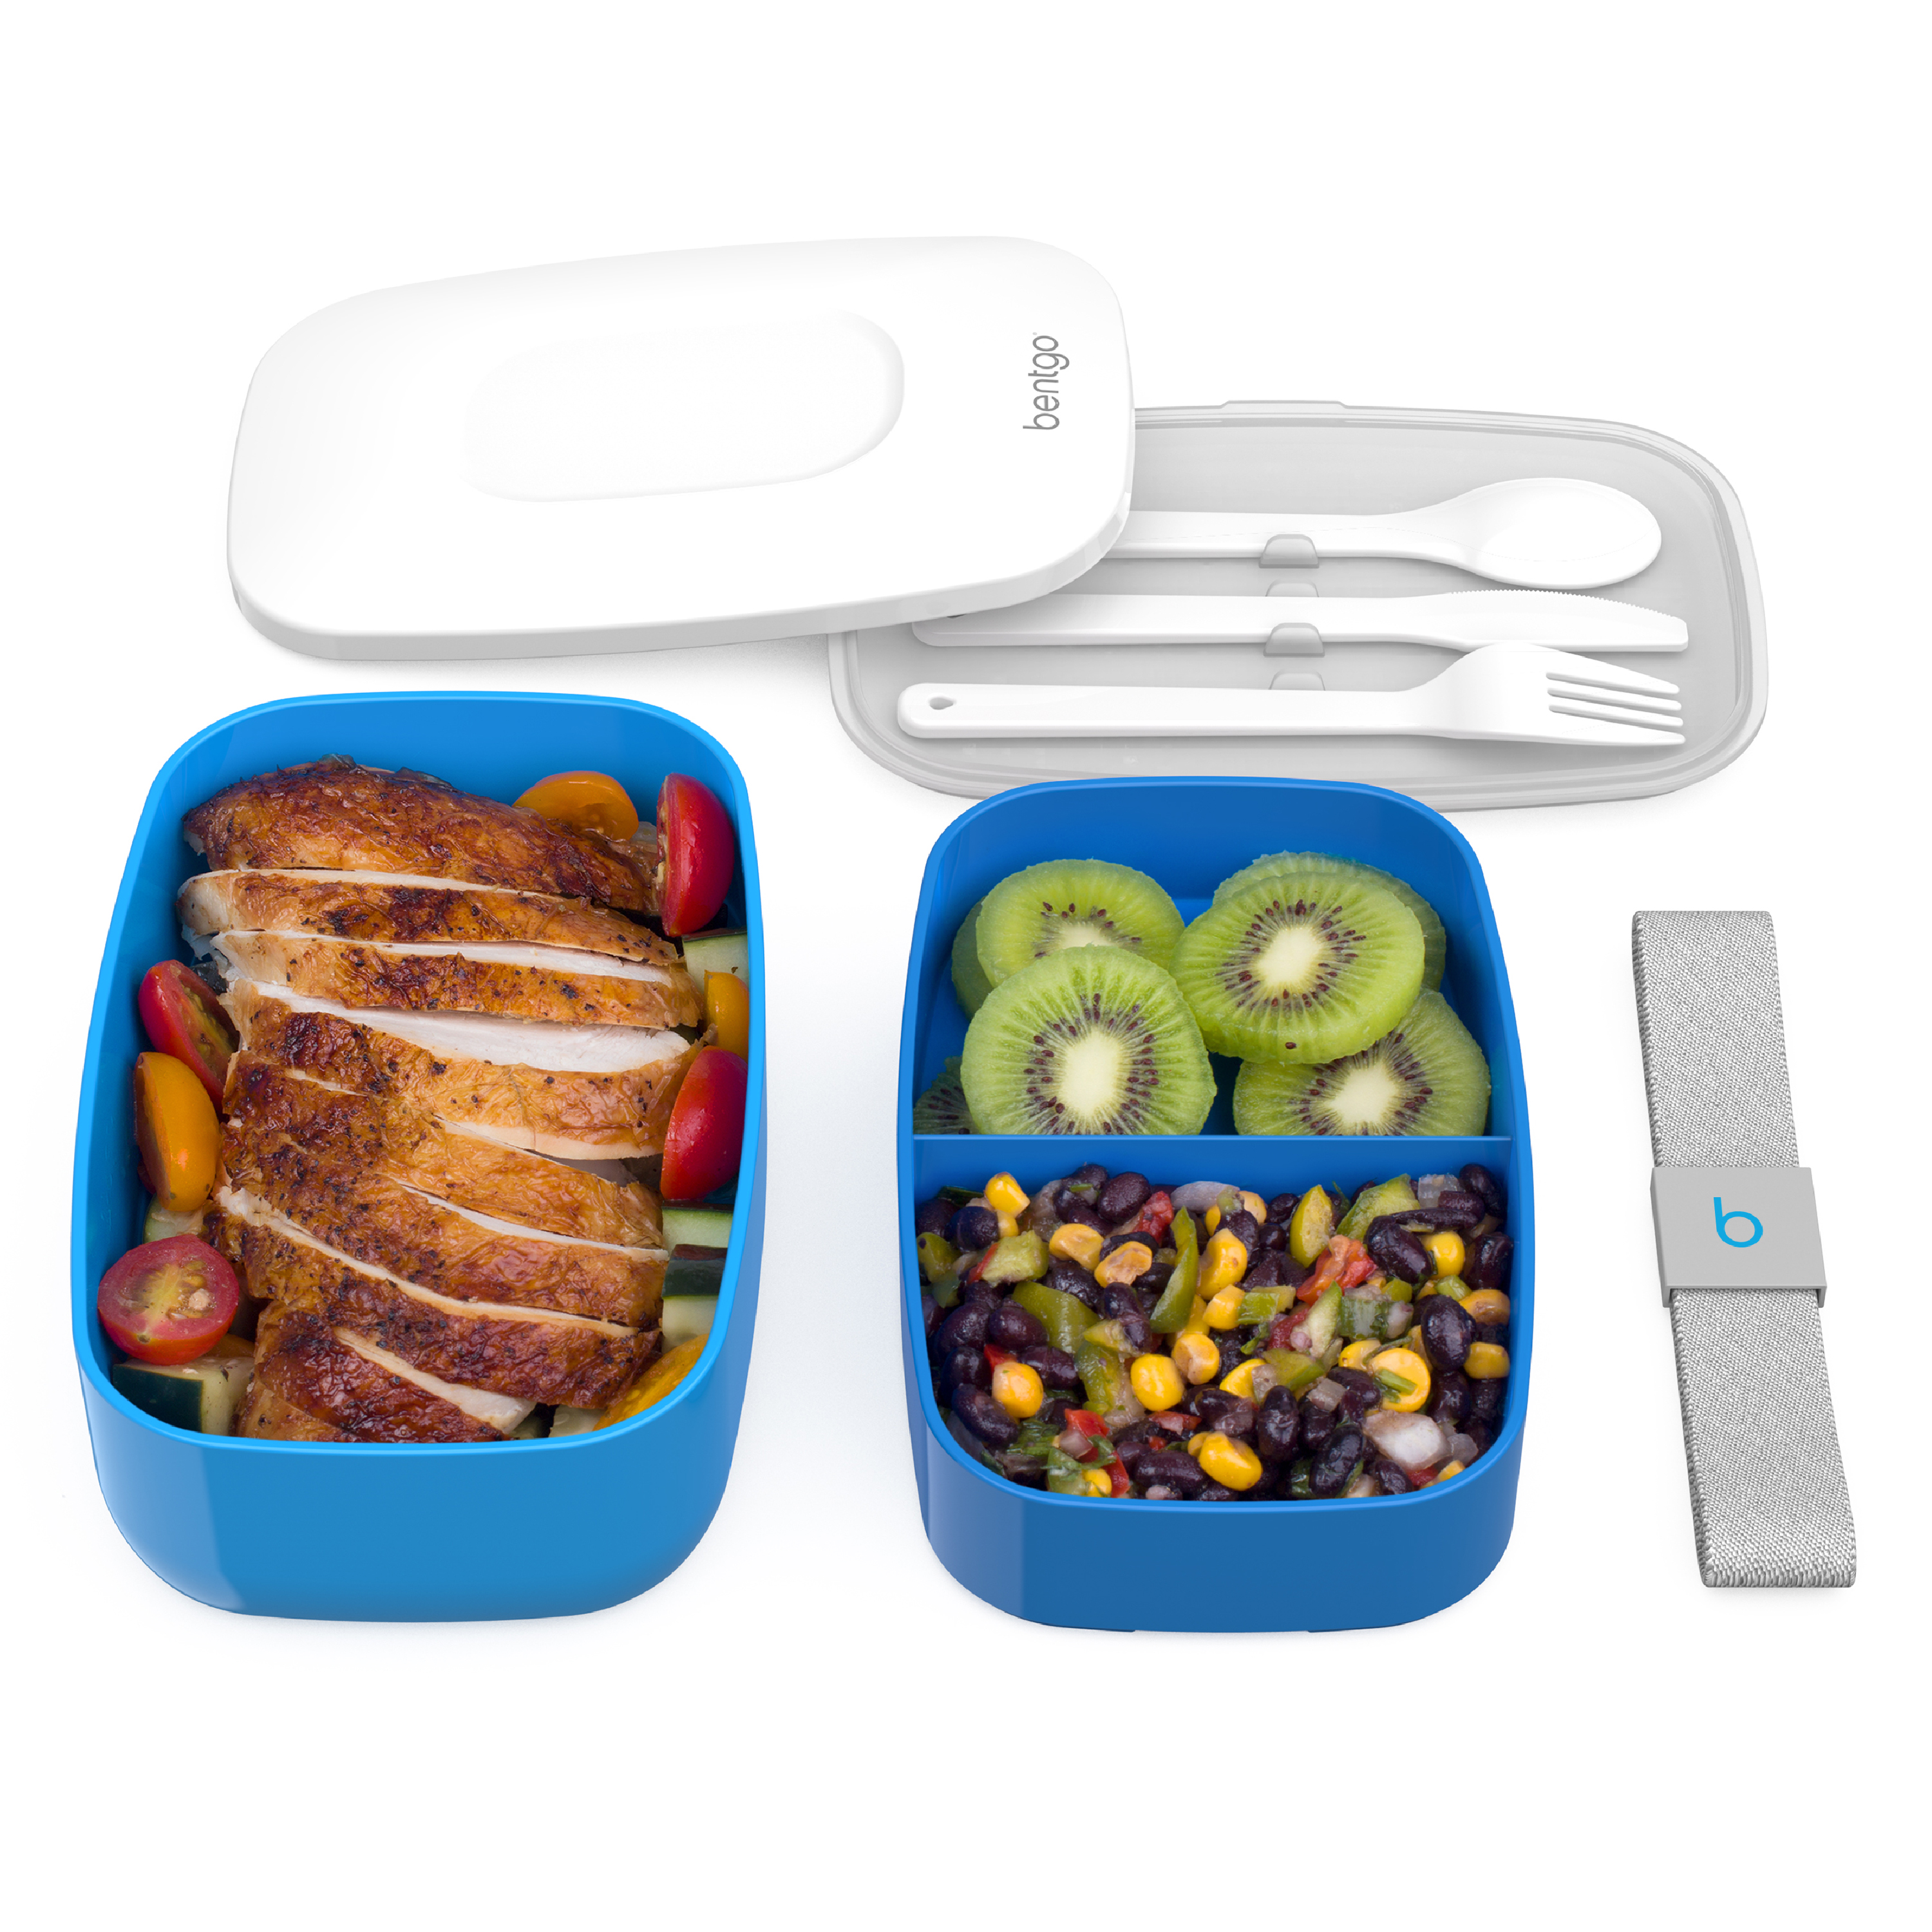 Bentgo Classic (Blue) - All-in-One Stackable Lunch Box Solution - Sleek and Modern Bento Box Design Includes 2 Stackable Containers, Built-in Plastic Silverware, and Sealing Strap - image 3 of 5